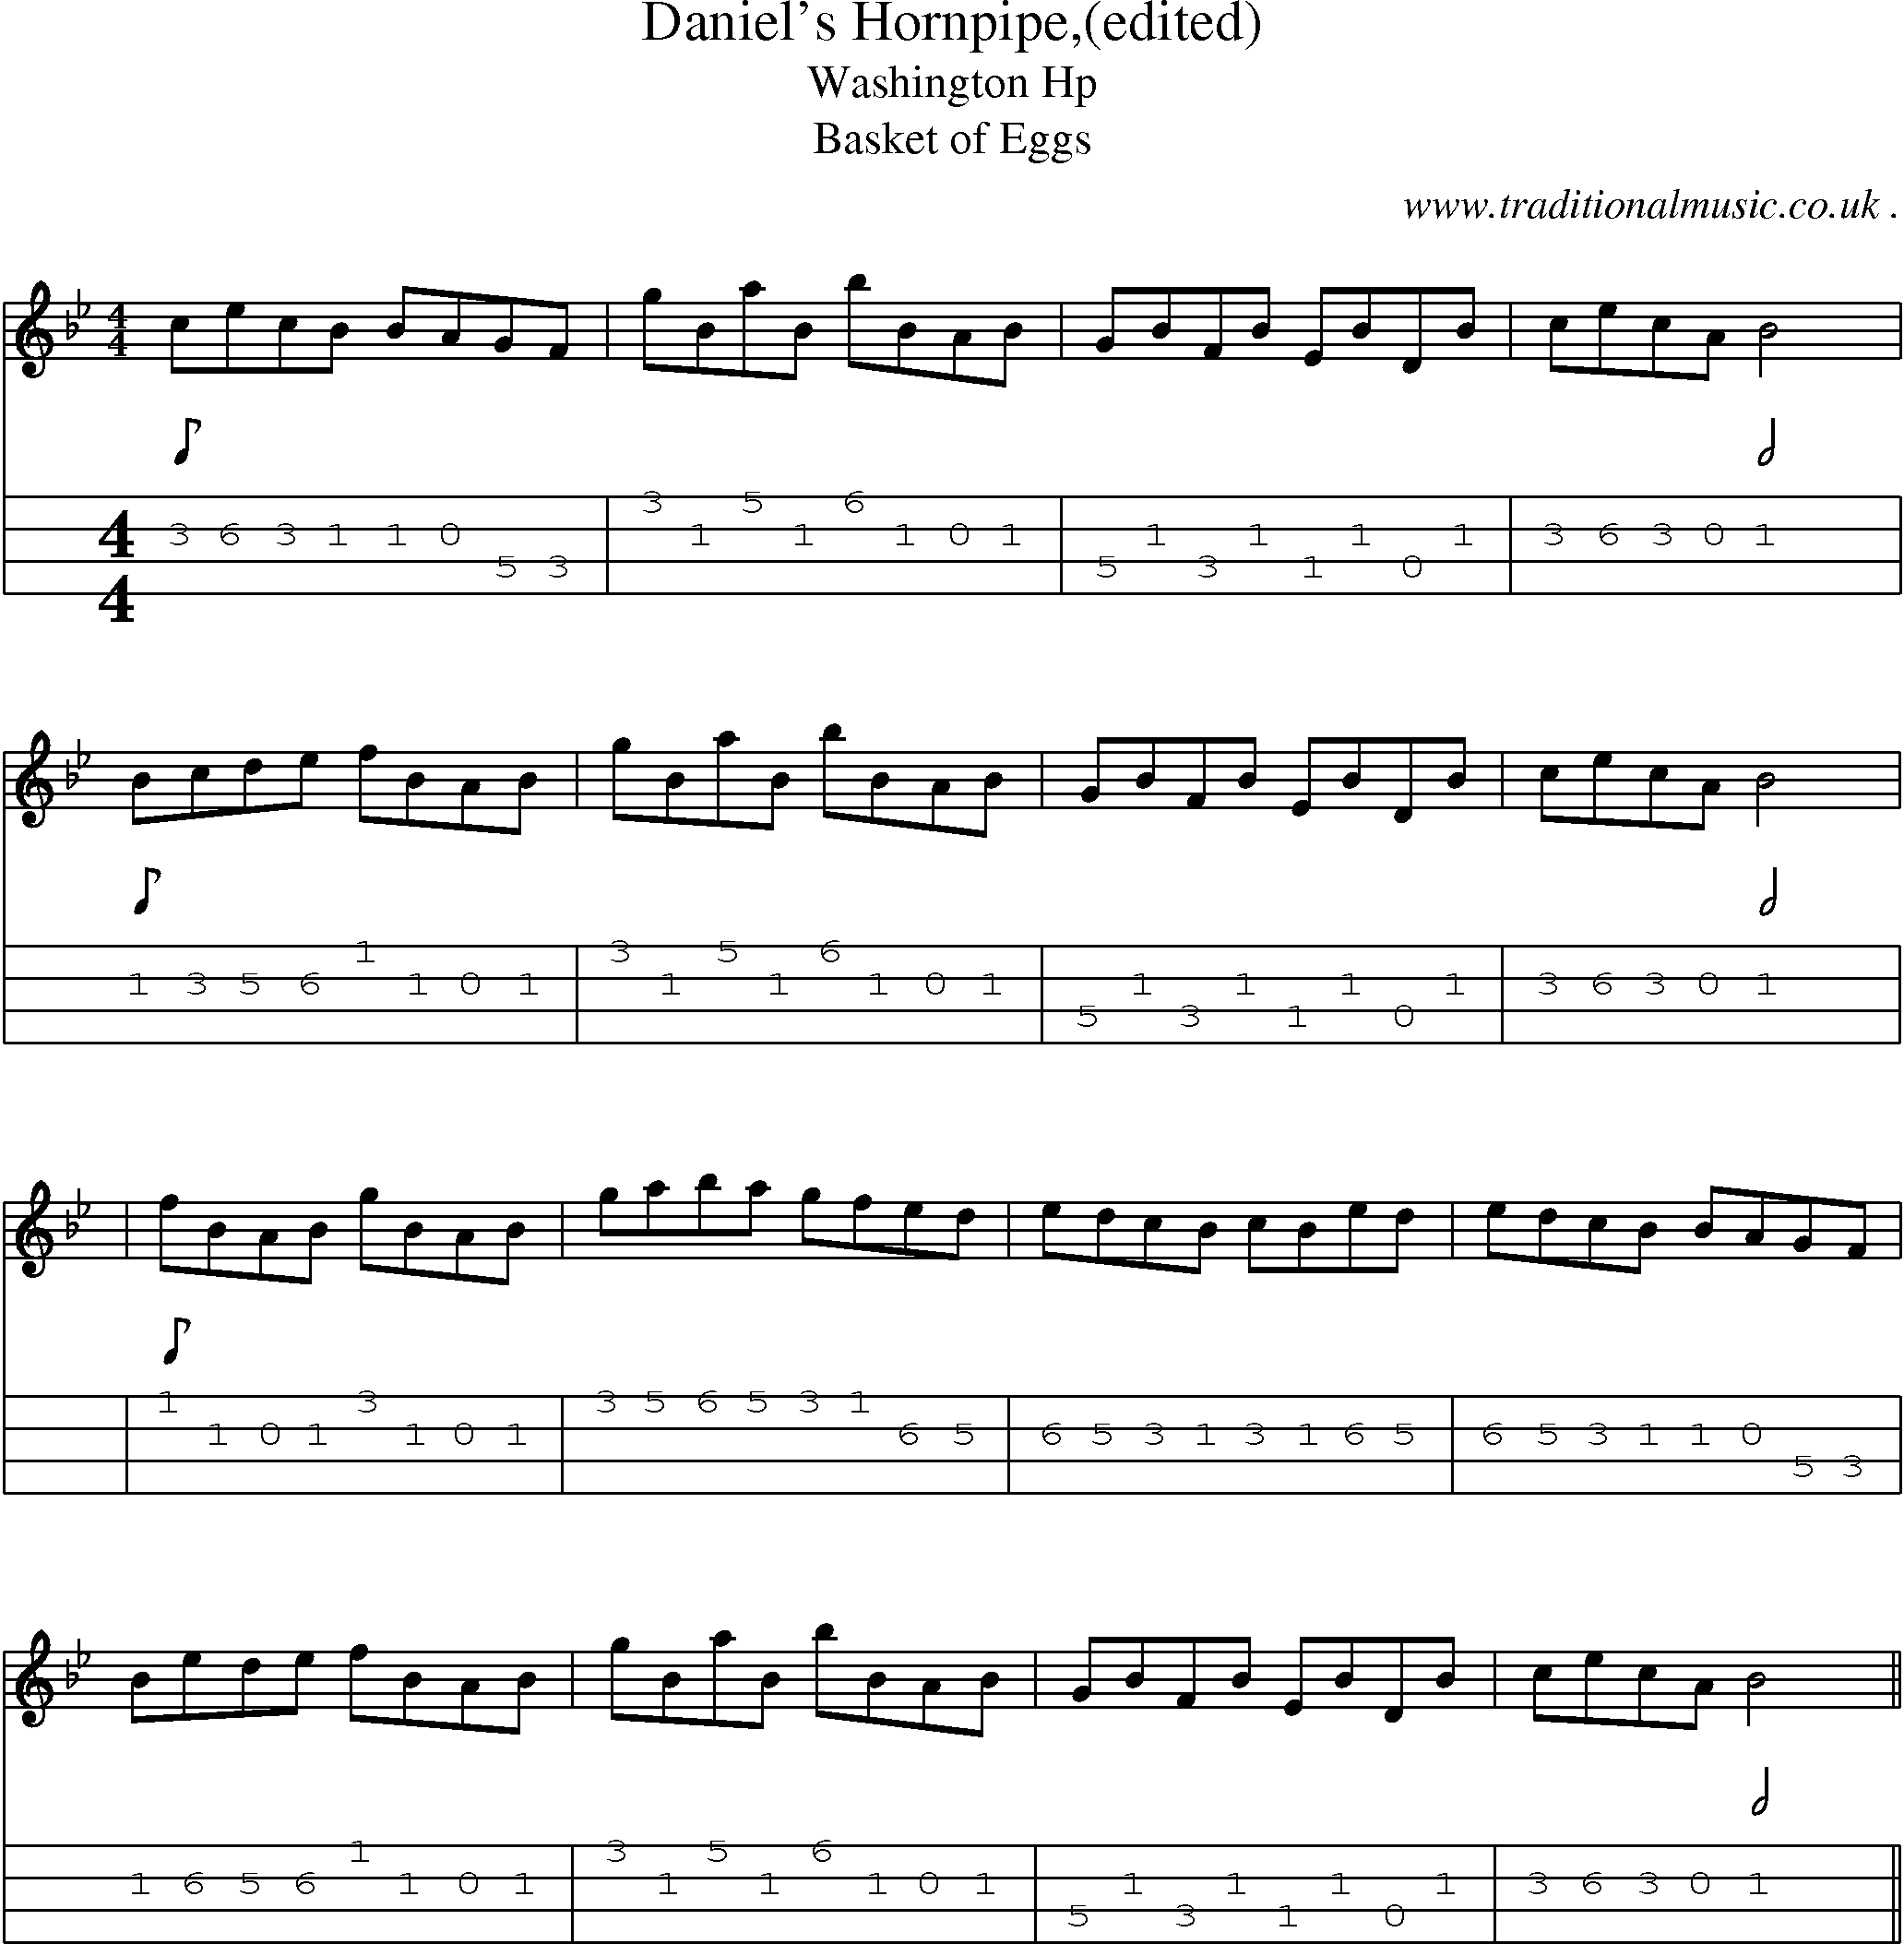 Sheet-Music and Mandolin Tabs for Daniels Hornpipe(edited)